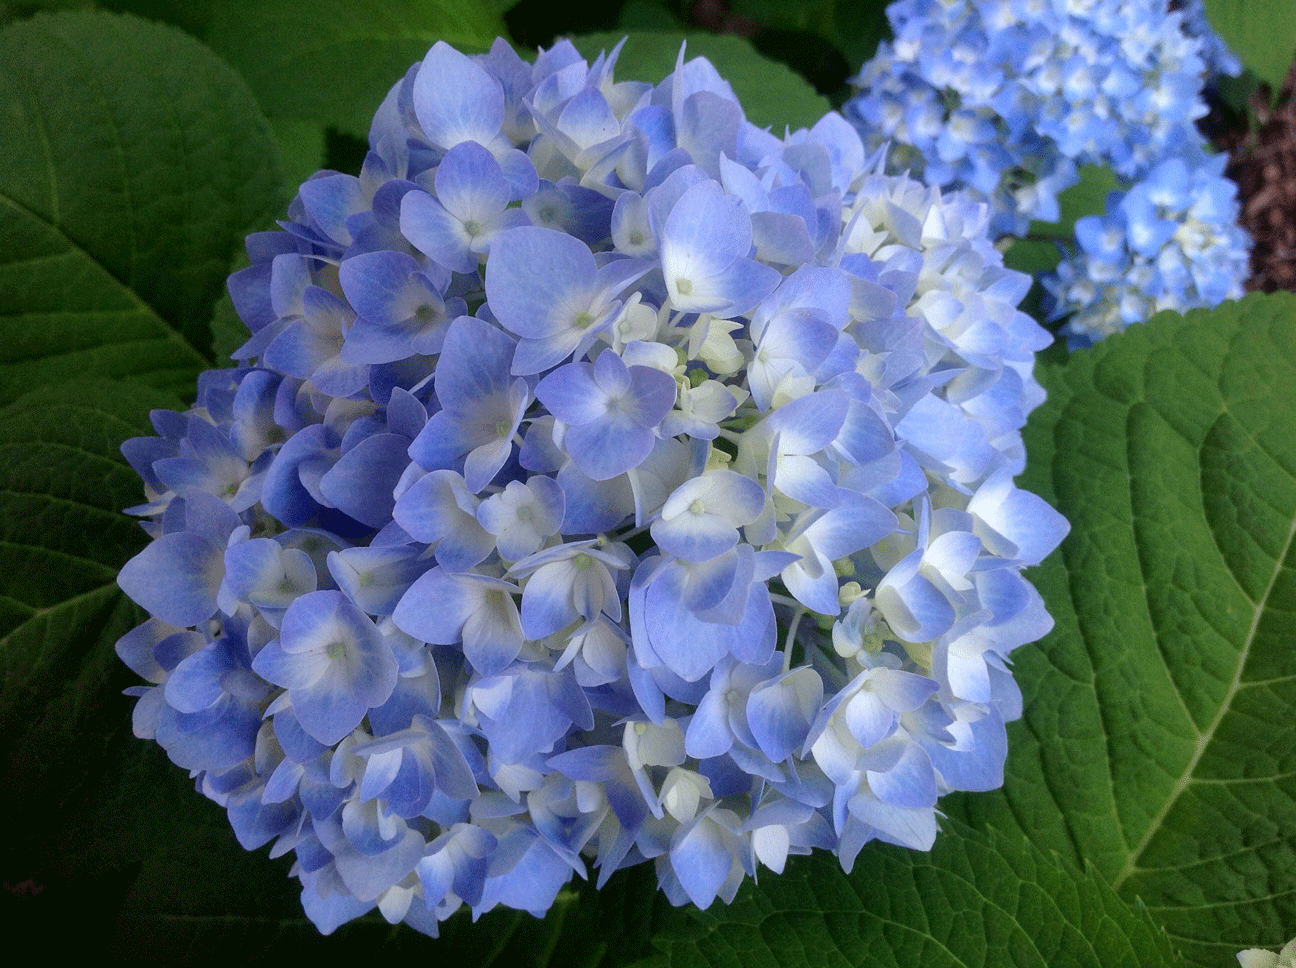 My blue hydrangea plant is huge this year and loaded with blooms.